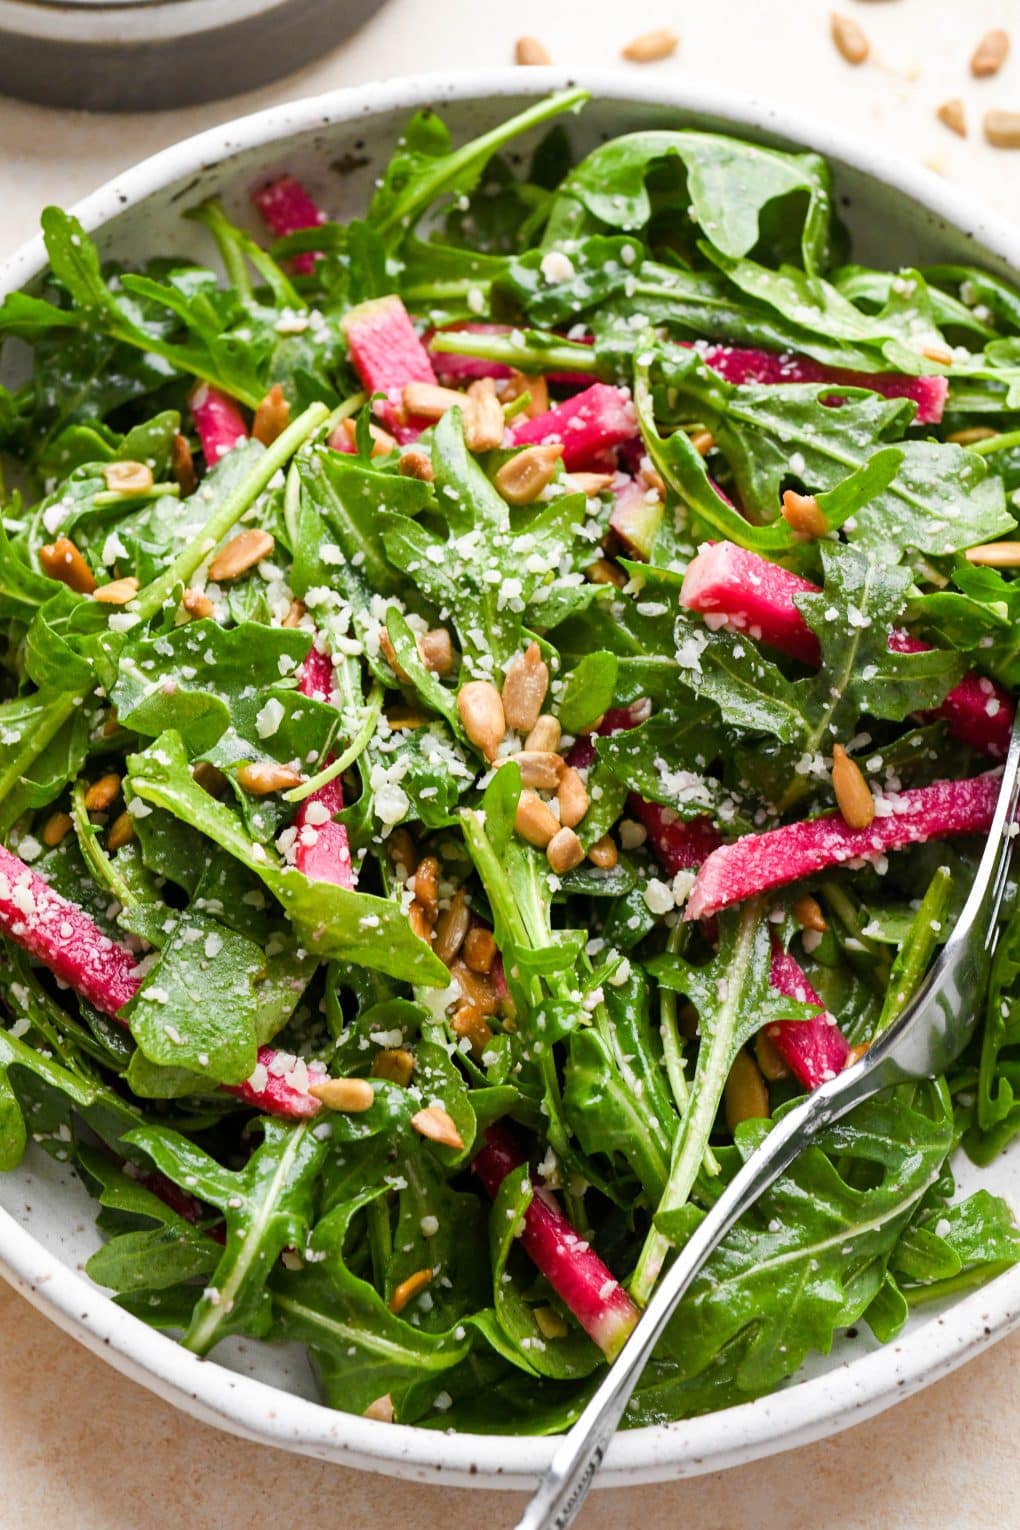 Simple arugula salad with thinly sliced watermelon radish on a small white speckled plate.